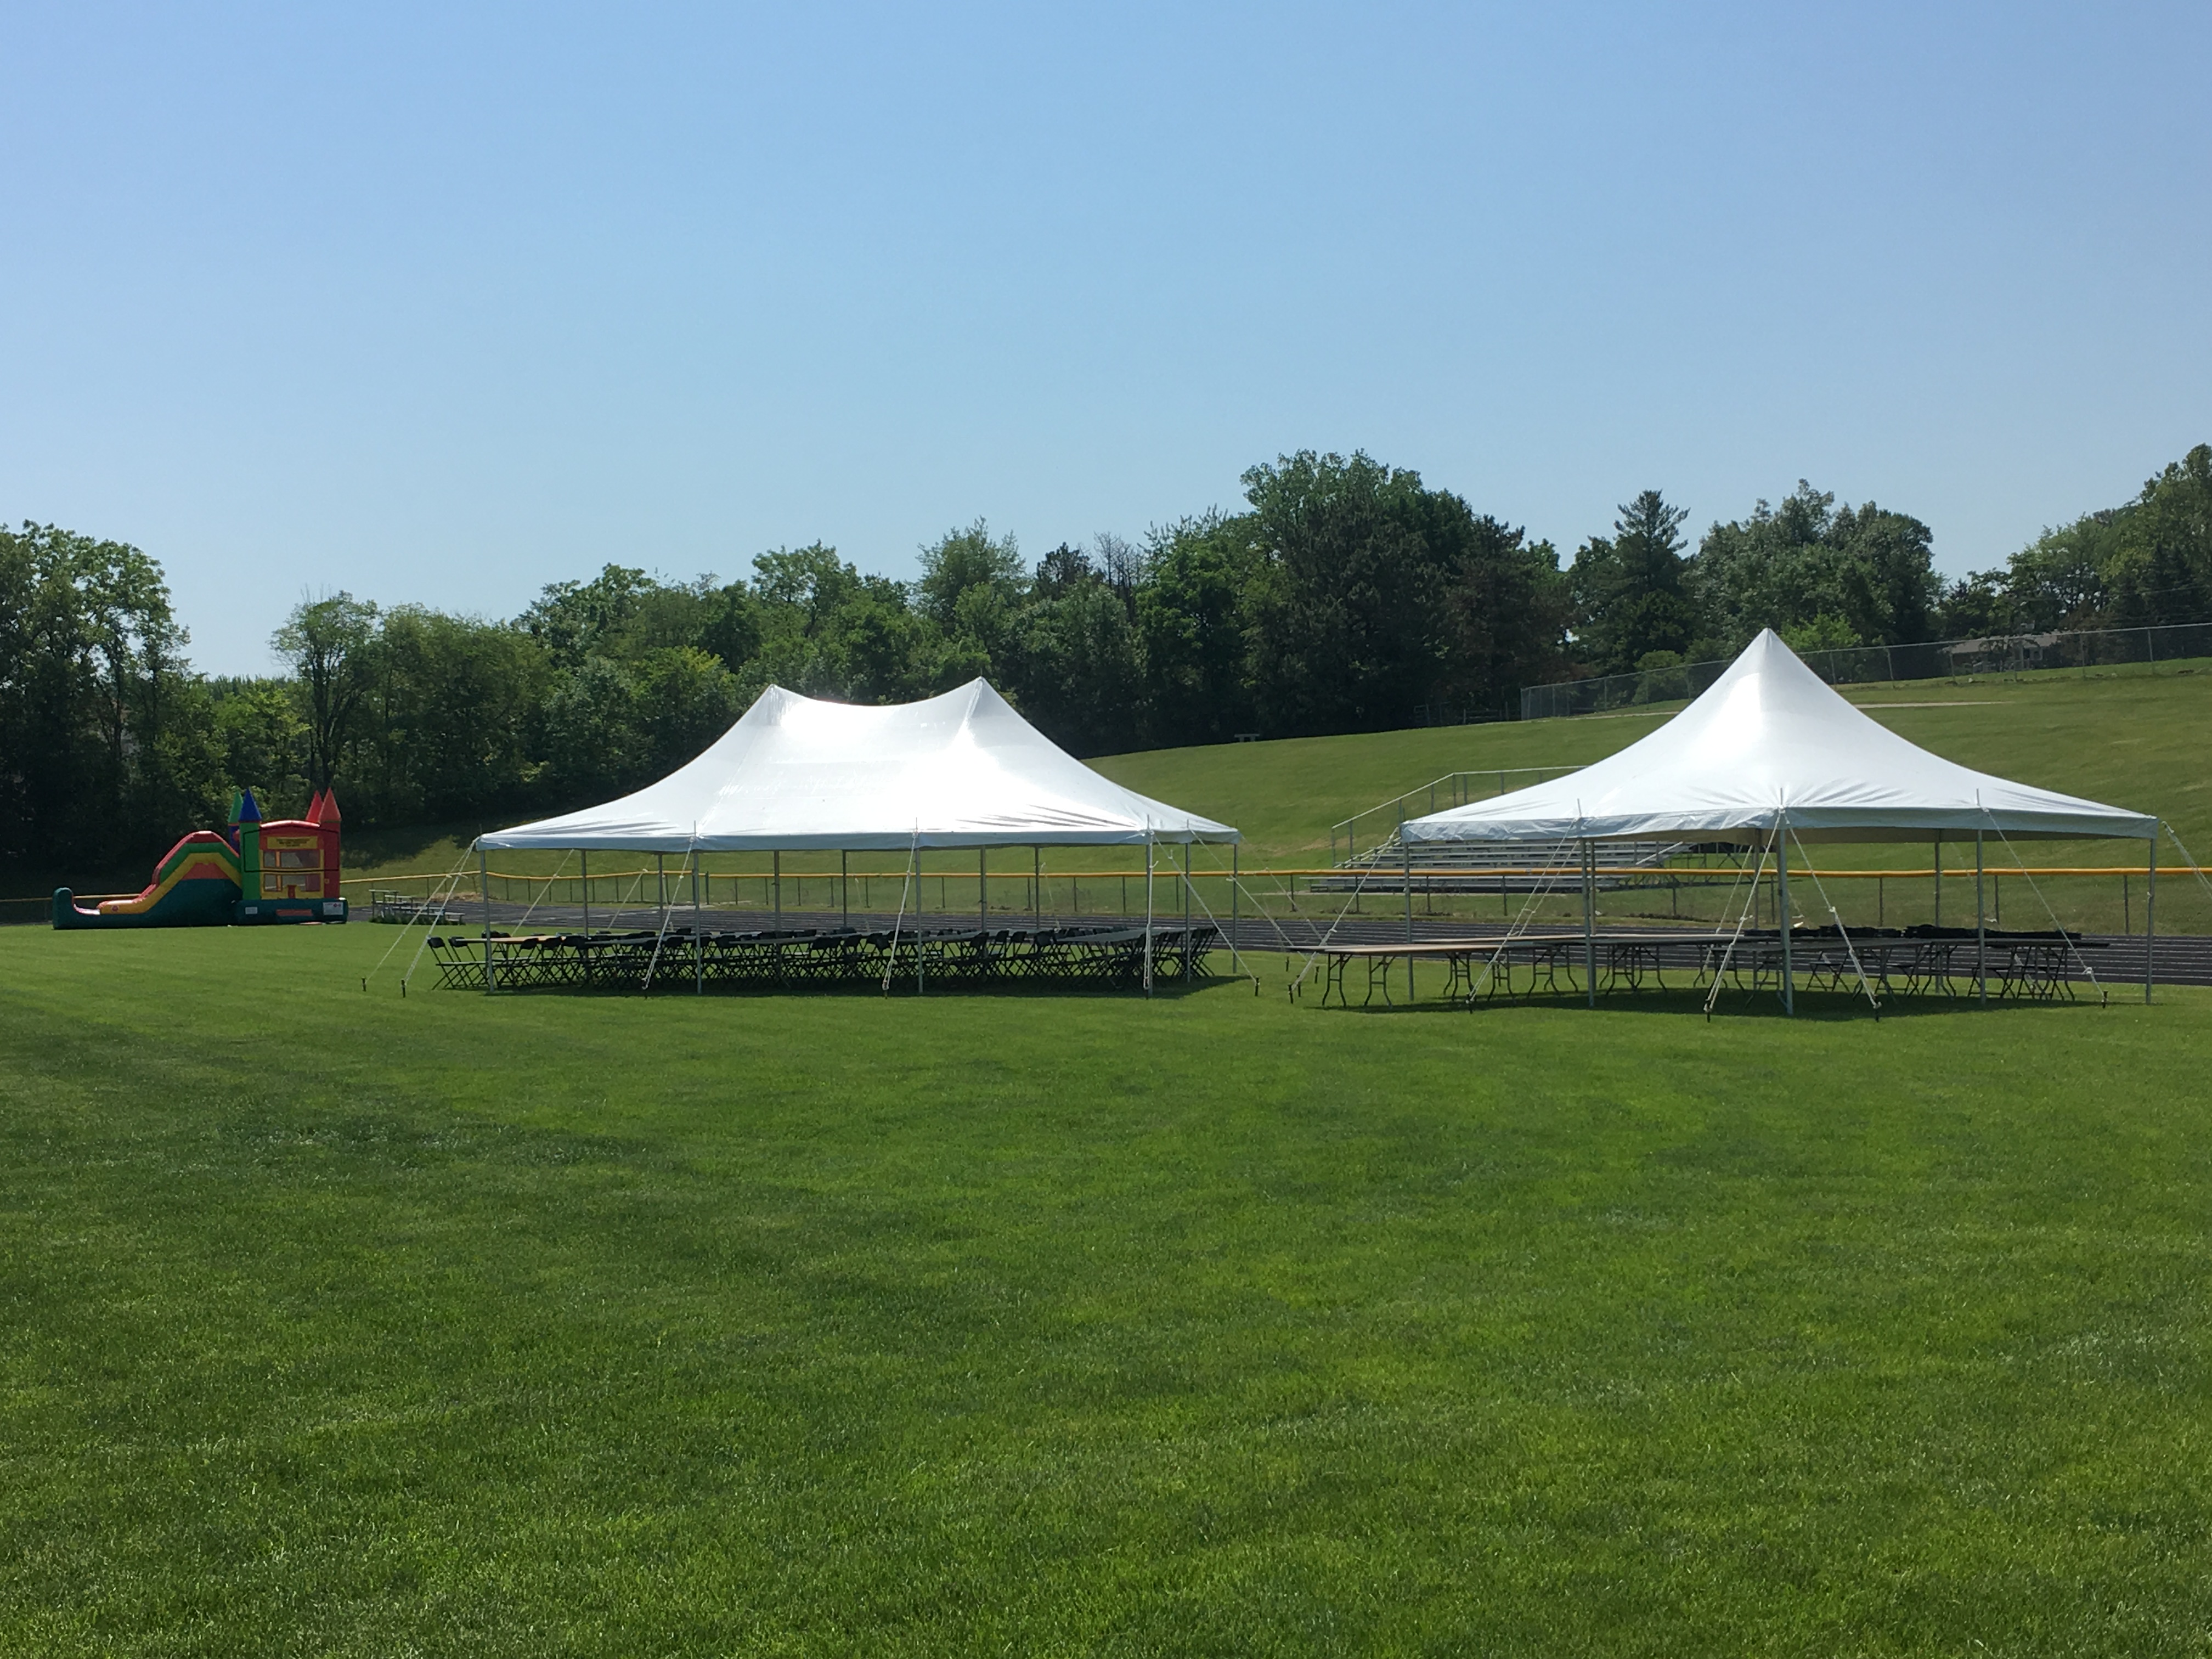 Bounce house (left), 20'x30' rope and pole tent (middle) and 20'x20' rope and pole tent (right) closeup